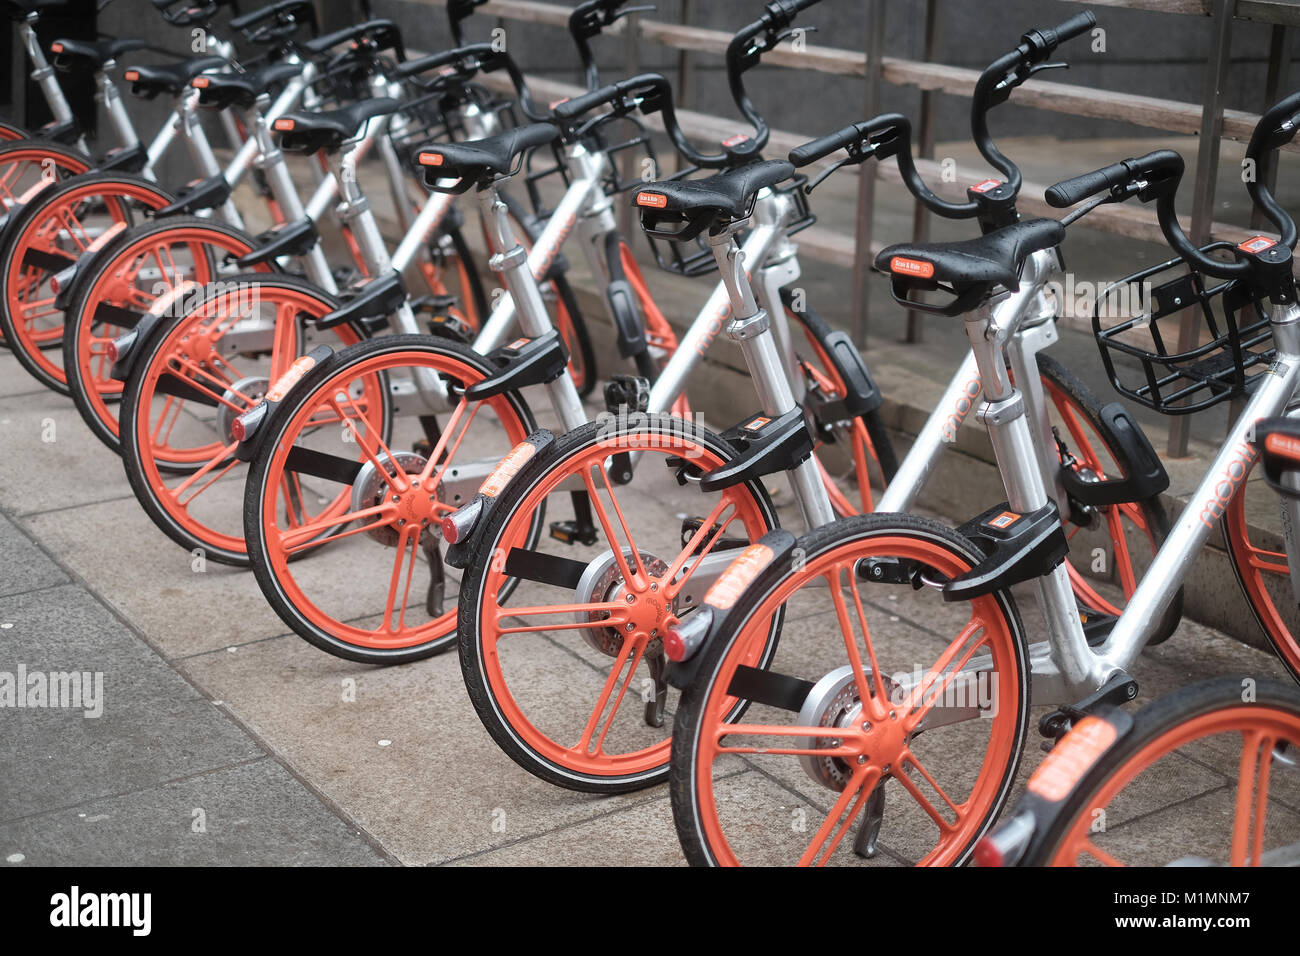 Manchester scan and ride mobikes. Stock Photo